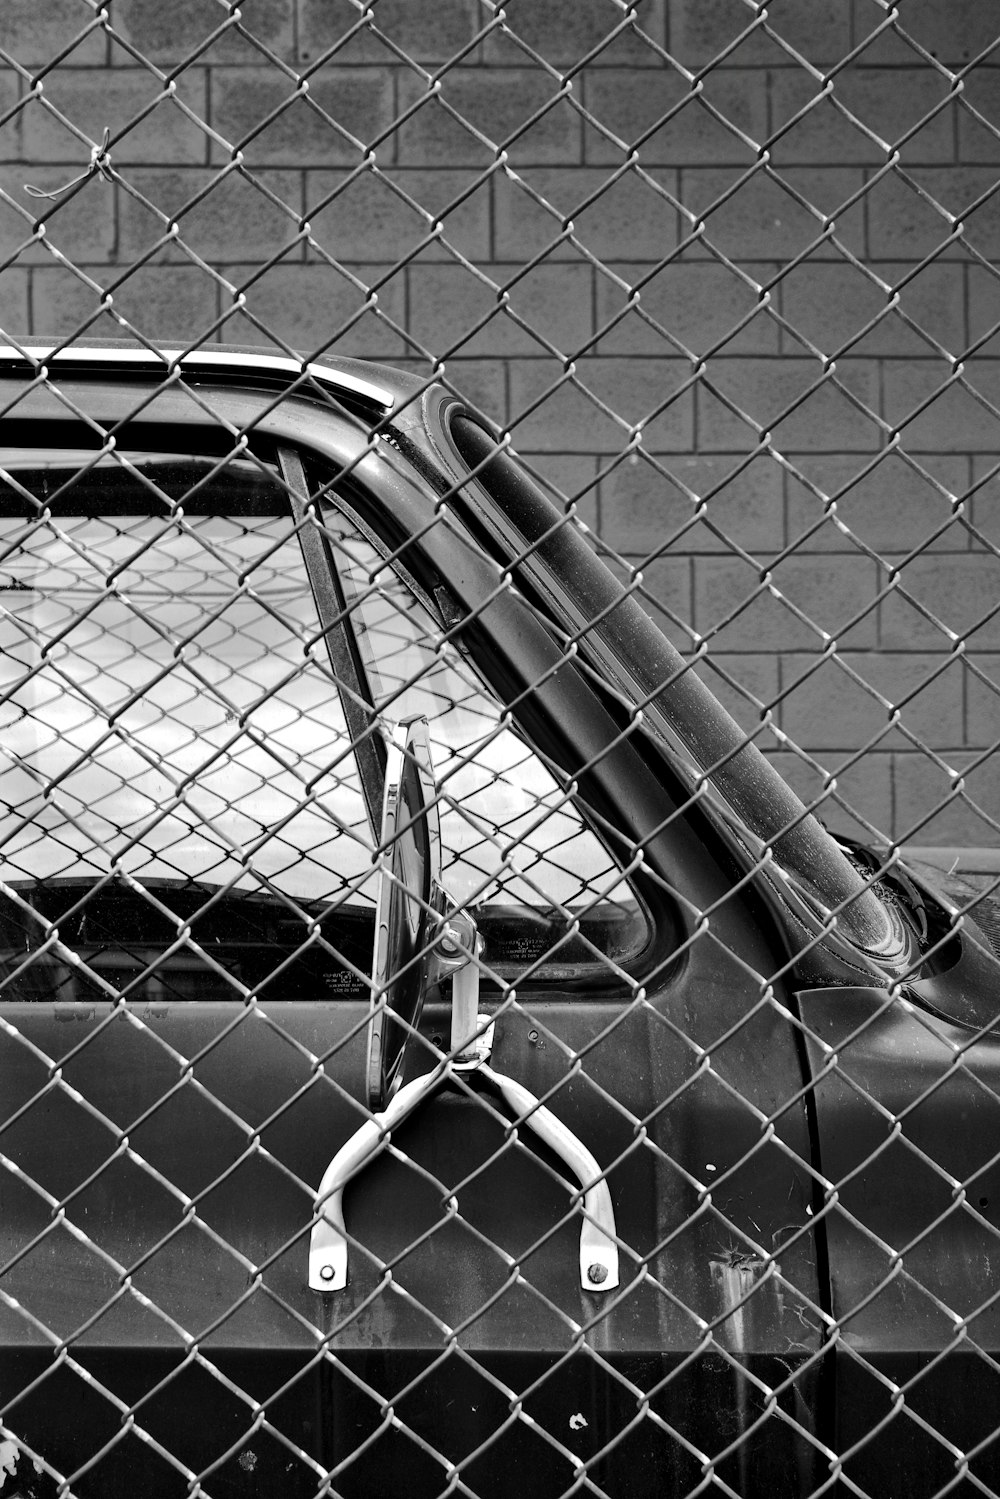 grayscale photography of car